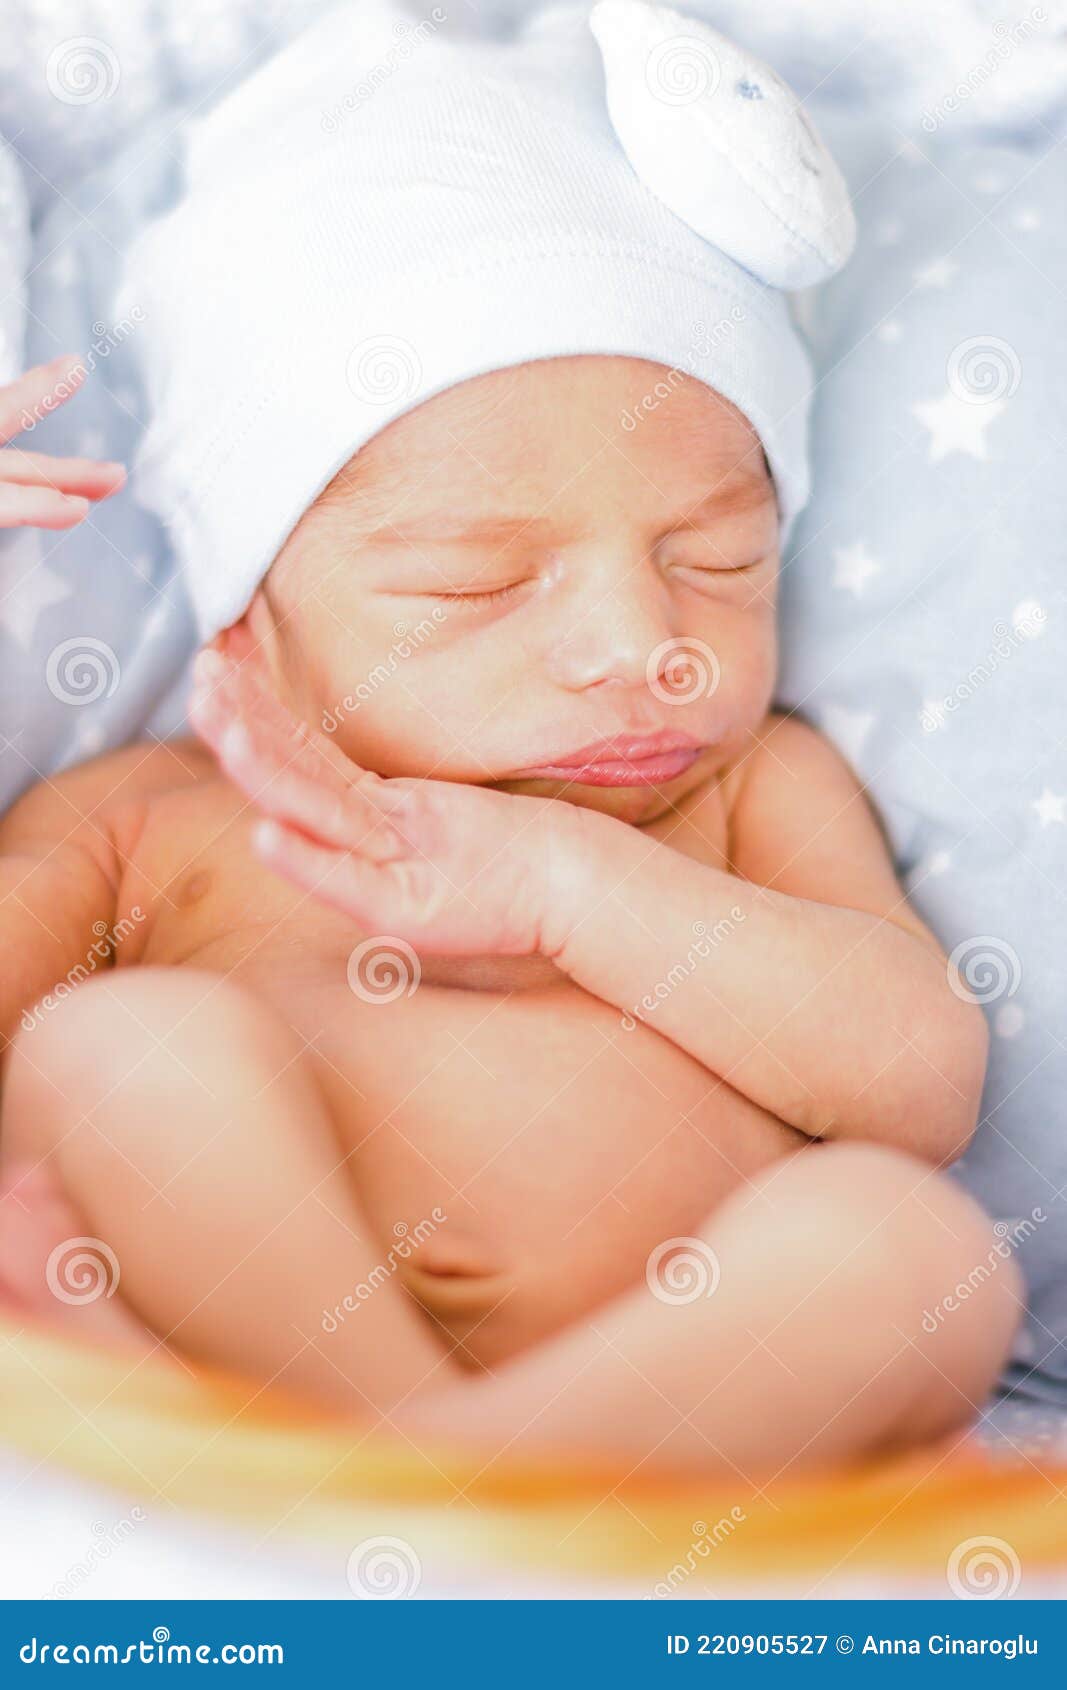 Sleeping Newborn Baby Boy with Funny Hat. Babyface Close-up. Very Sweet  Infant Stock Image - Image of adorable, cute: 220905527